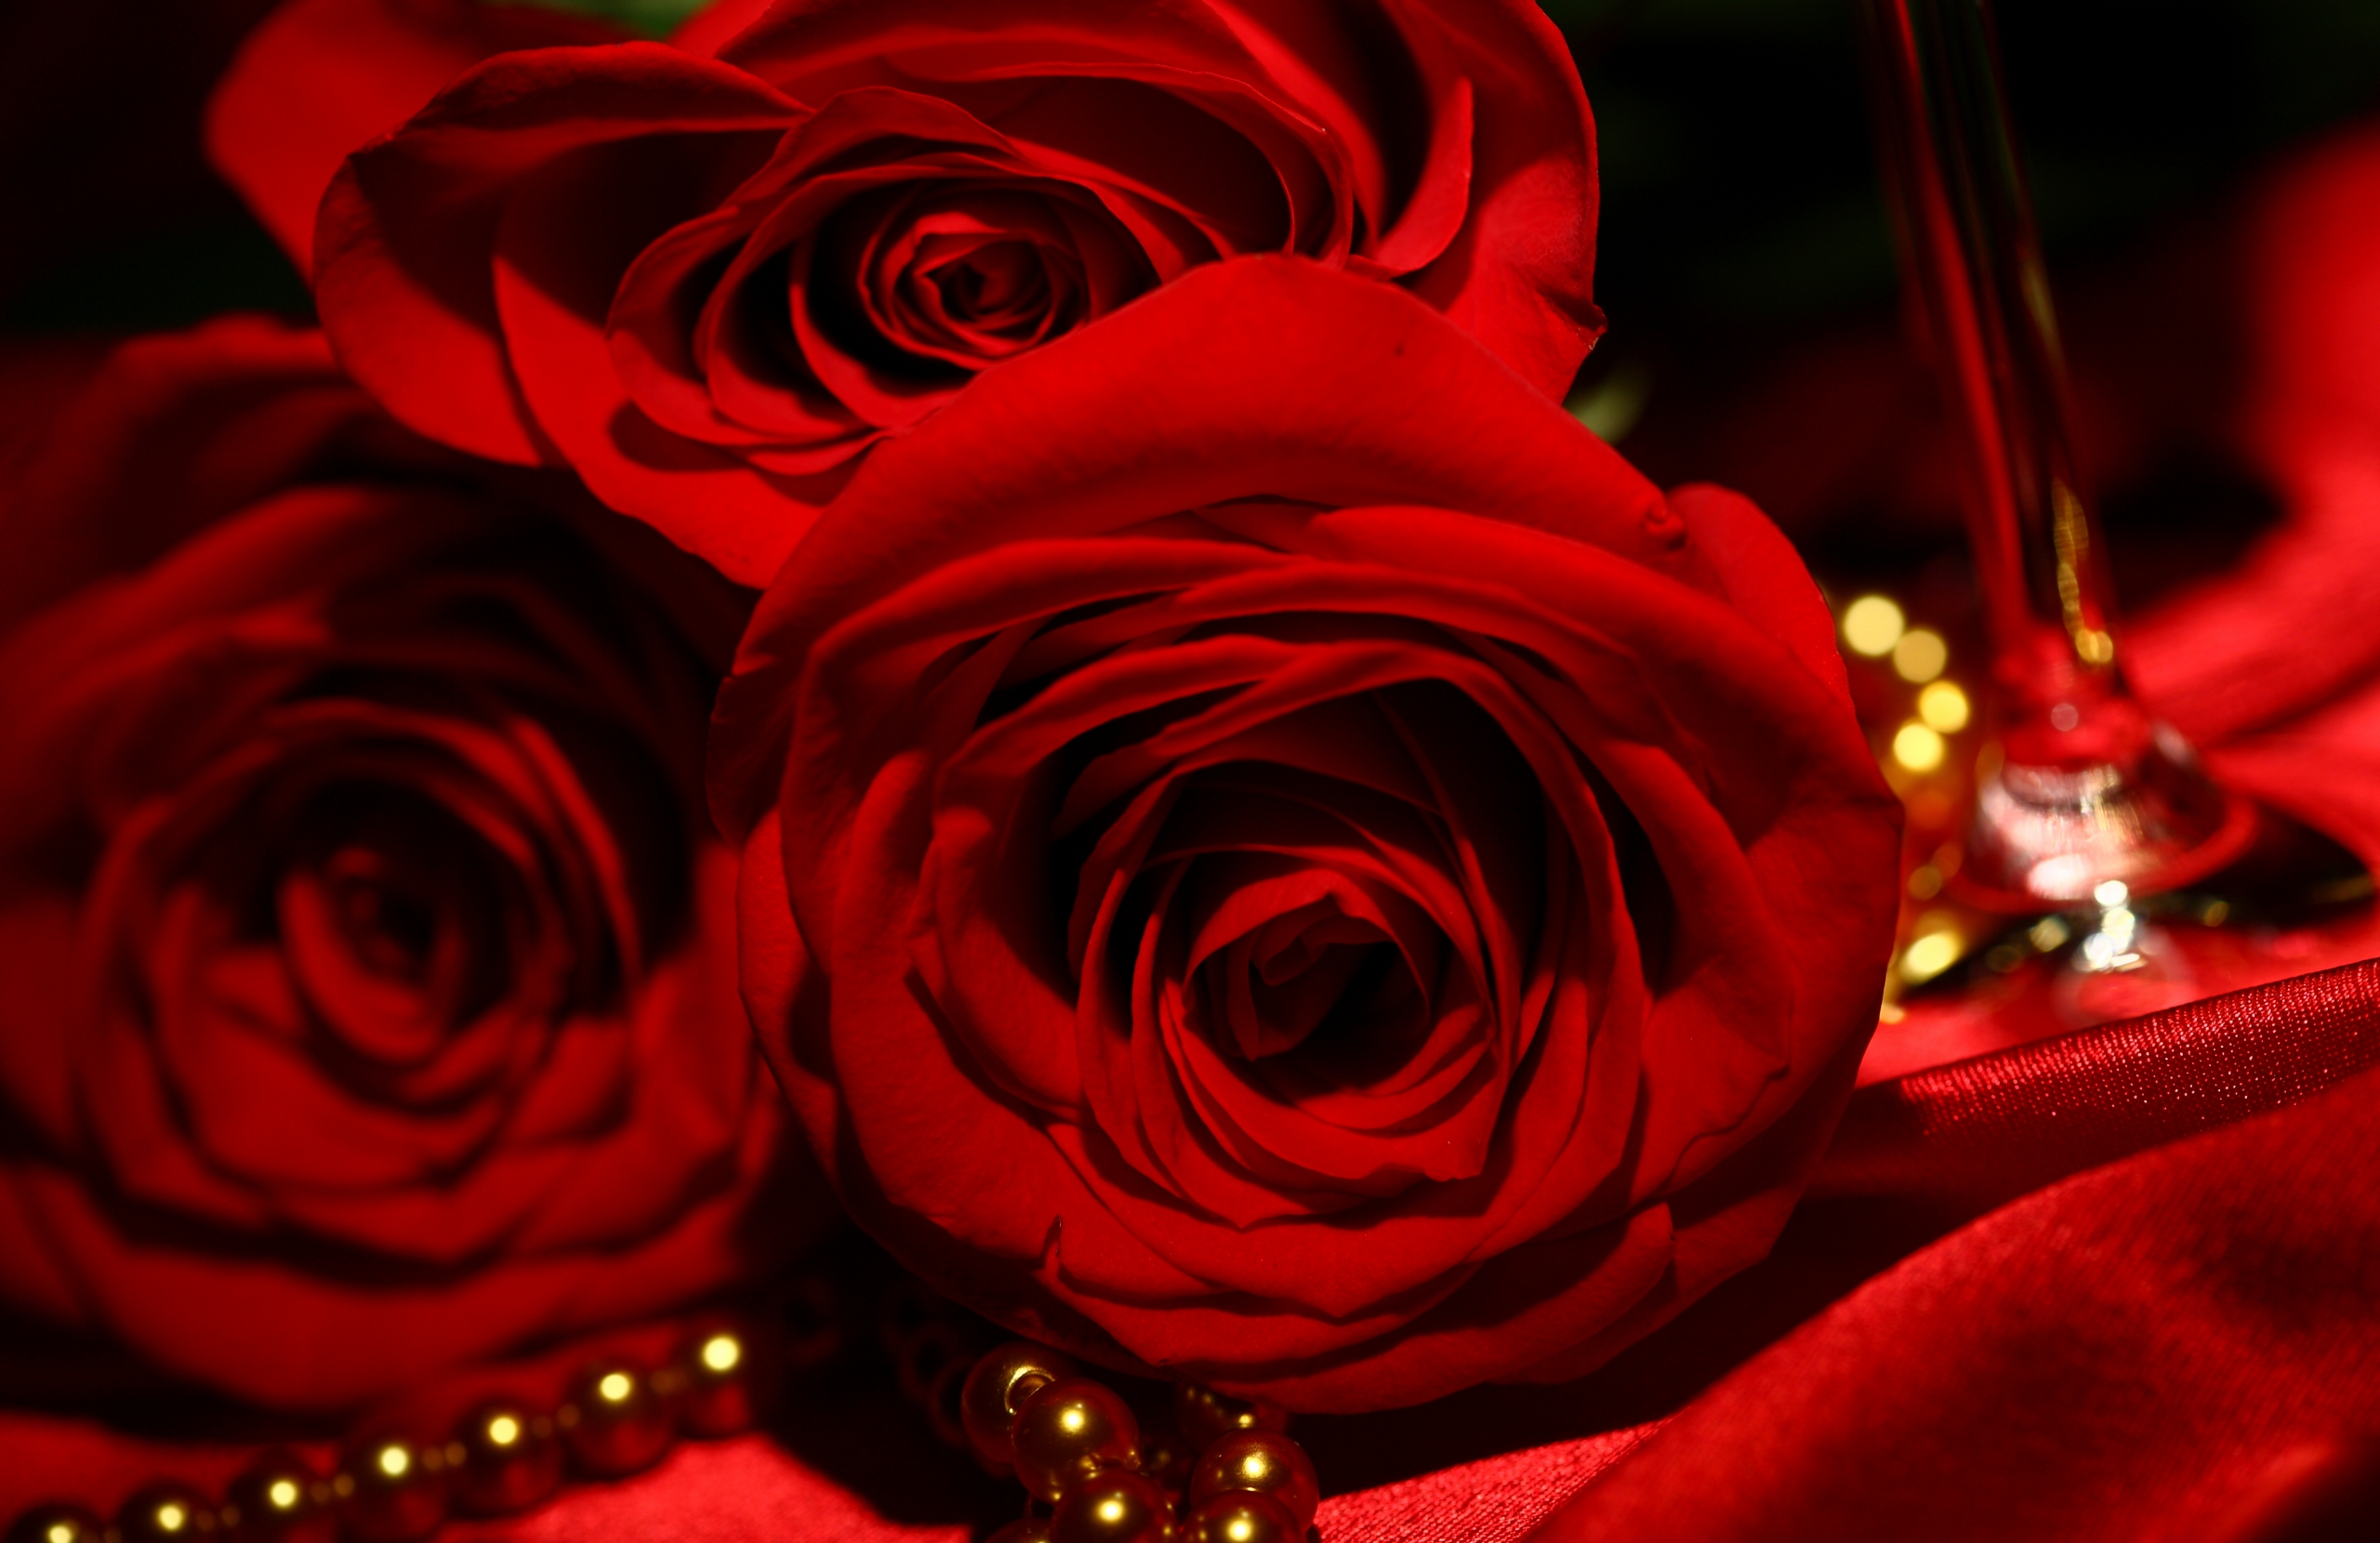 Red Roses Backgrounds   Wallpaper High Definition High Quality